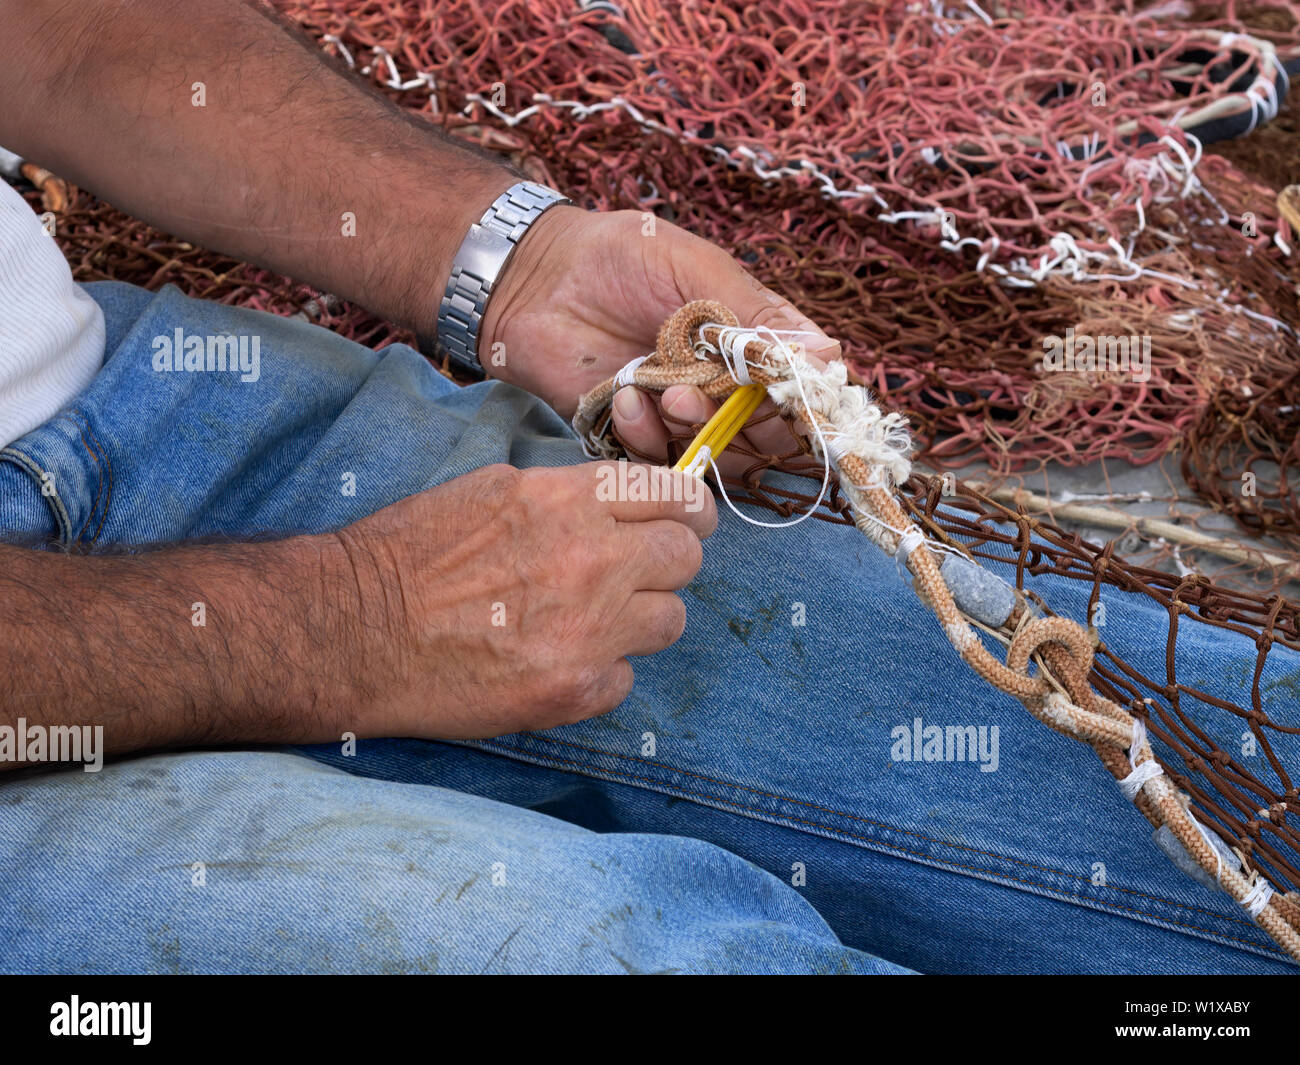 1,800+ Fishing Net Underwater Stock Photos, Pictures & Royalty-Free Images  - iStock